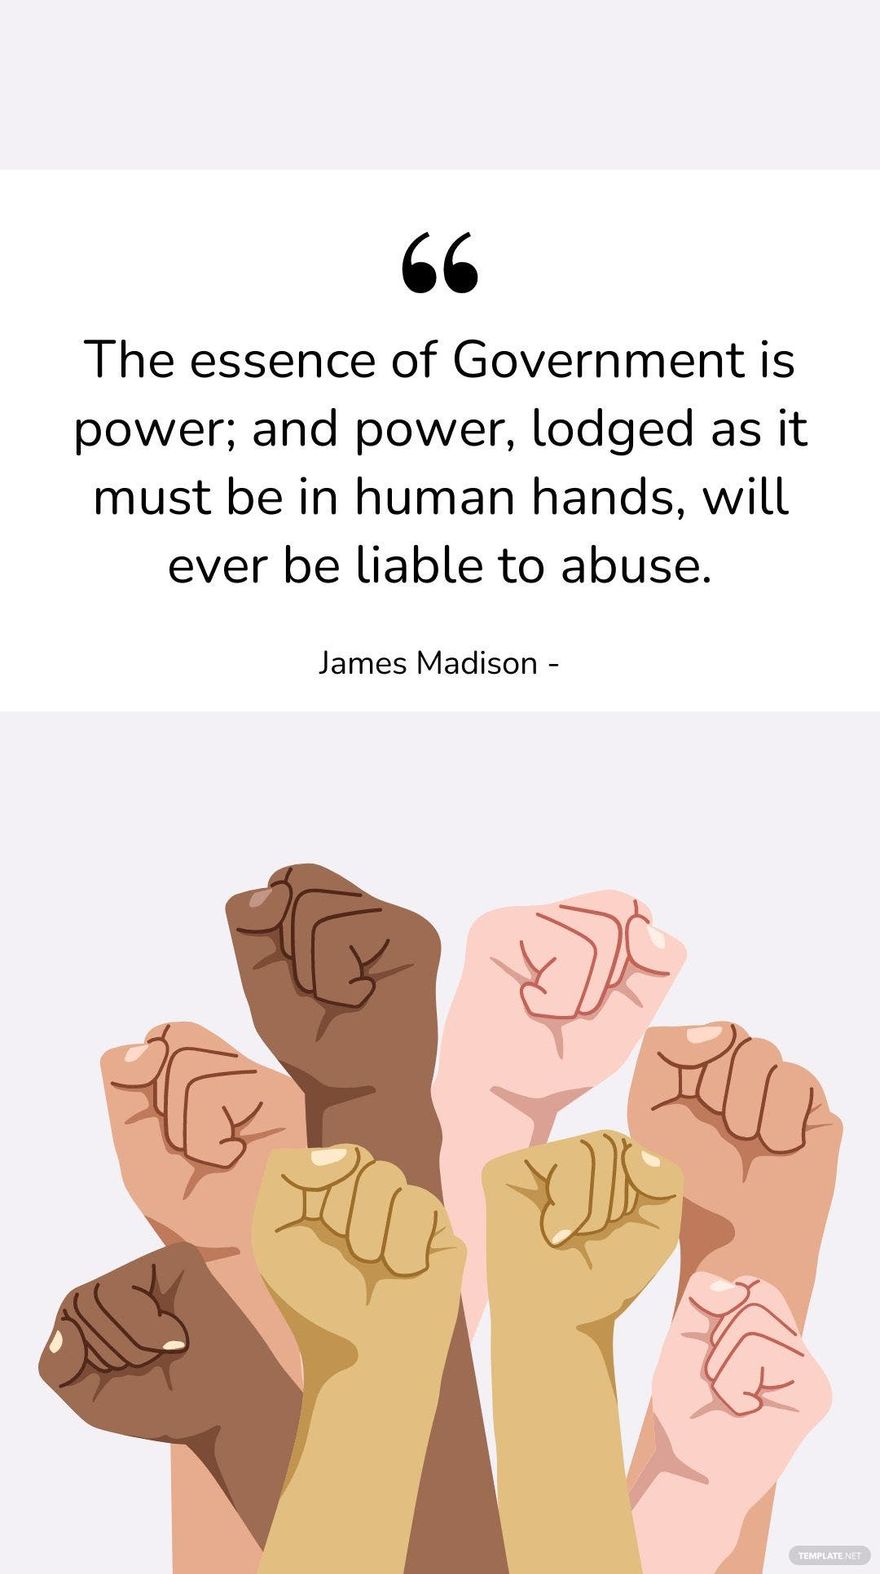 James Madison - The essence of Government is power; and power, lodged as it must be in human hands, will ever be liable to abuse.